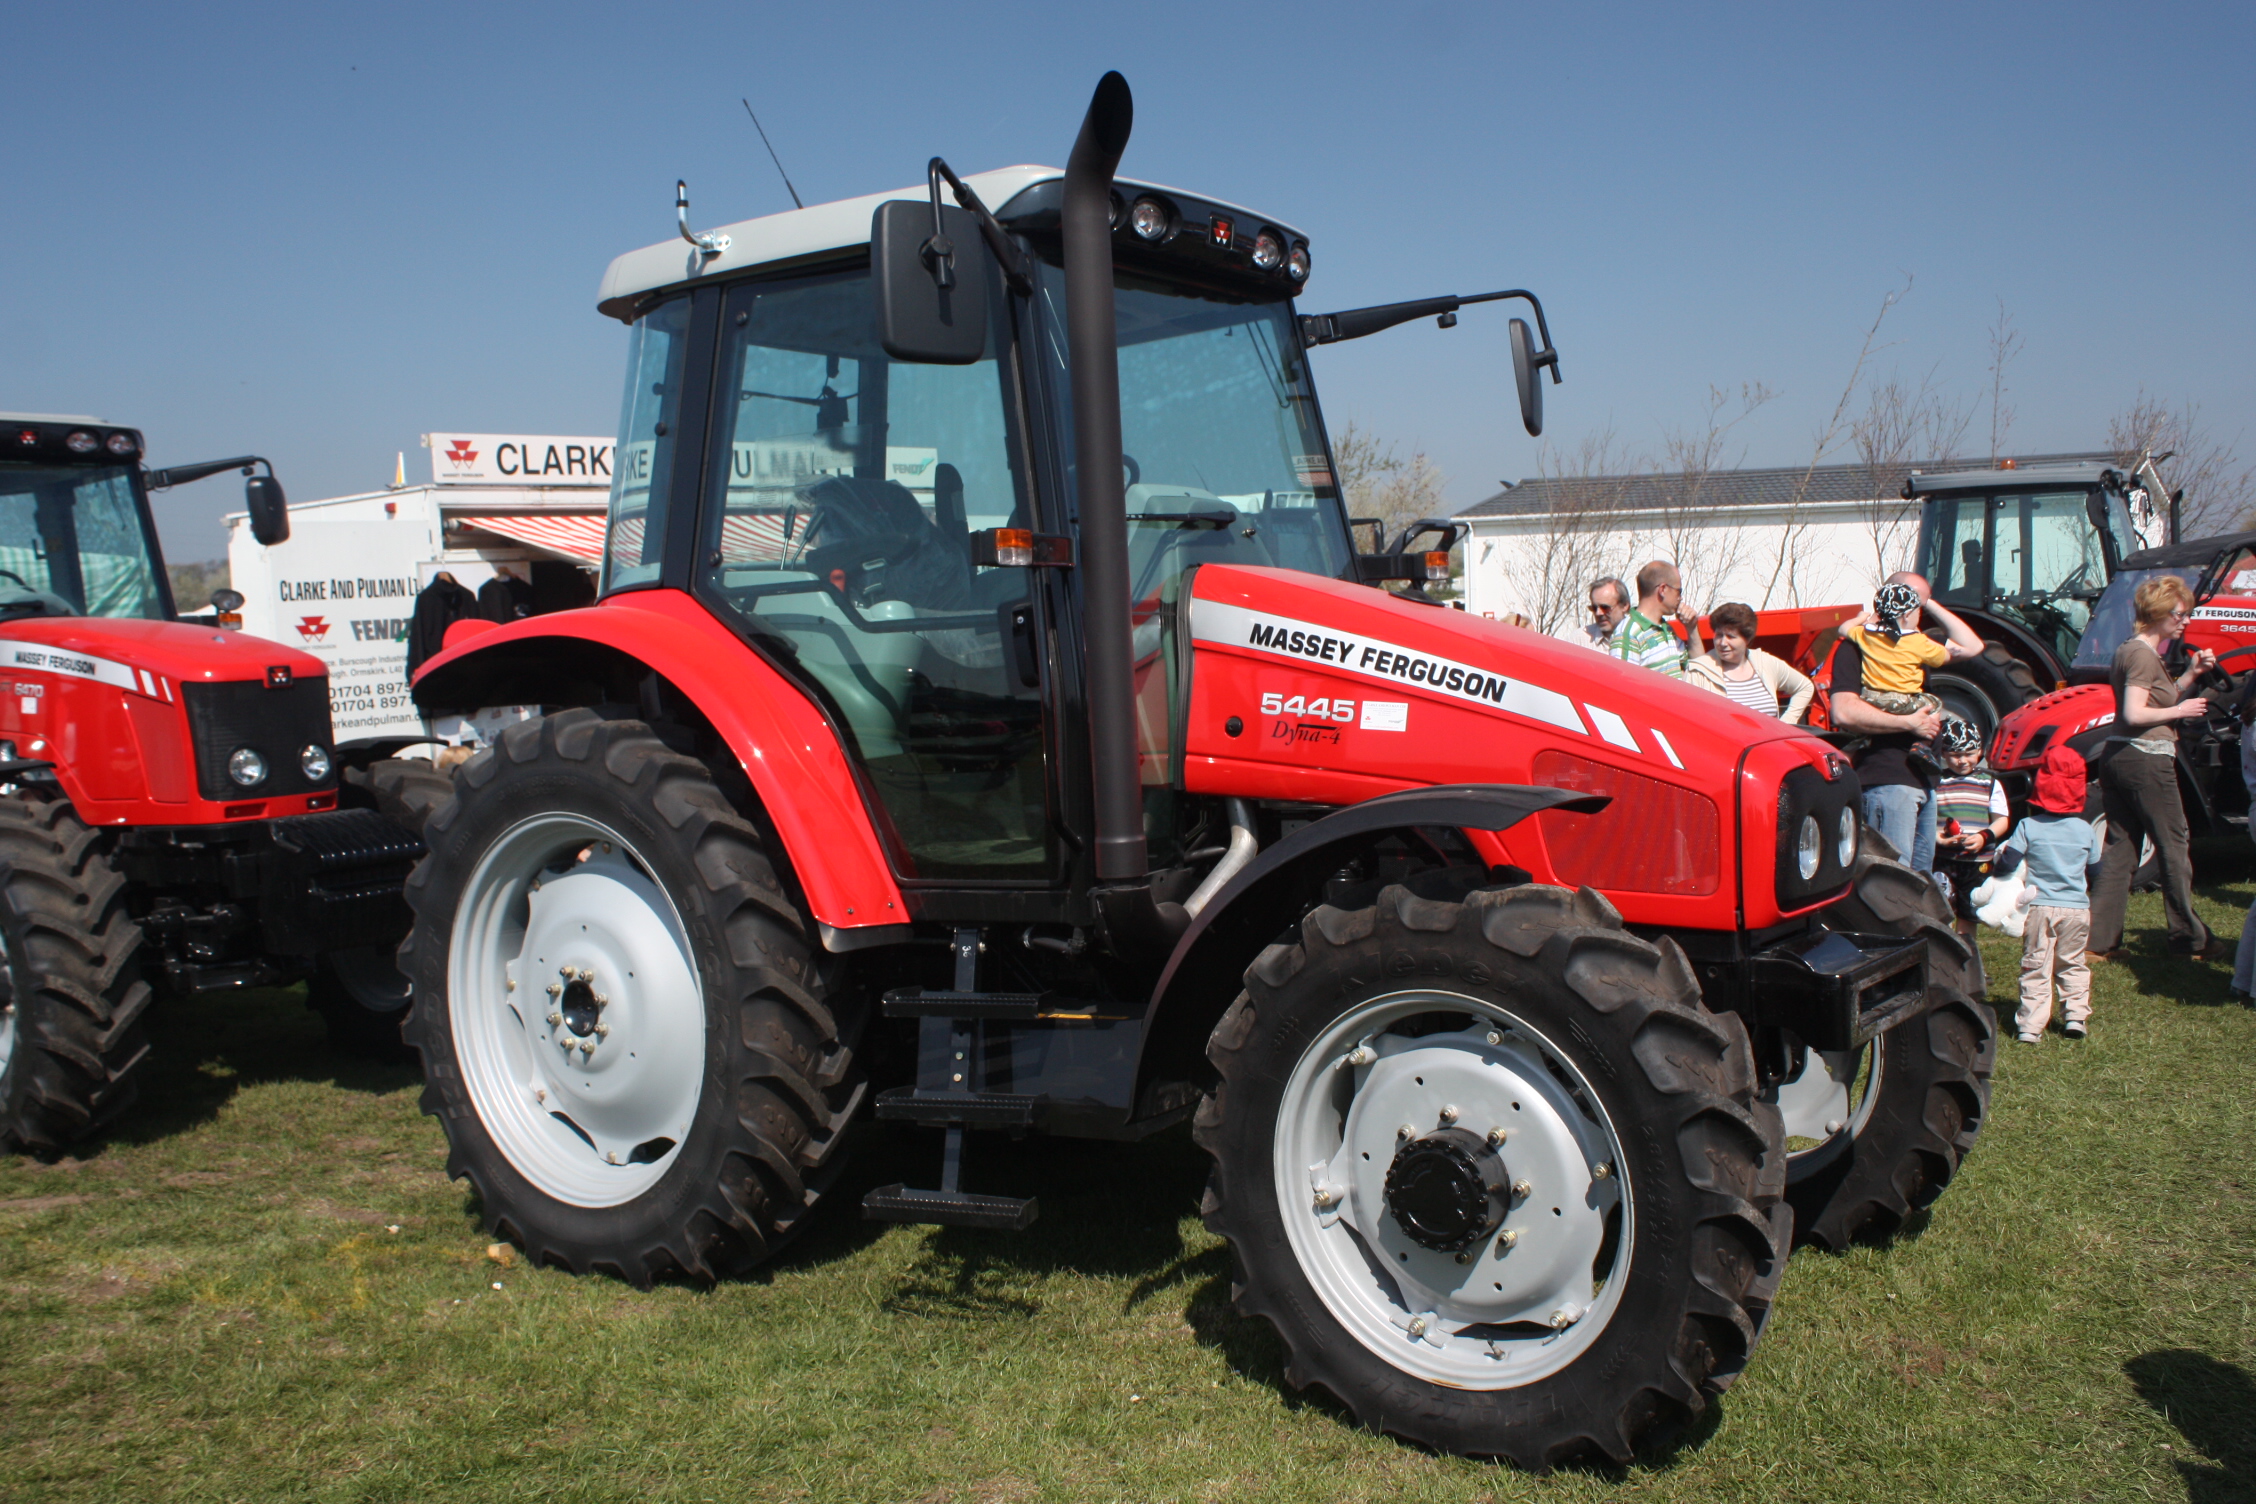 Massey Ferguson Tractor And Construction Plant Wiki The Classic Vehicle And Machinery Wiki 1452